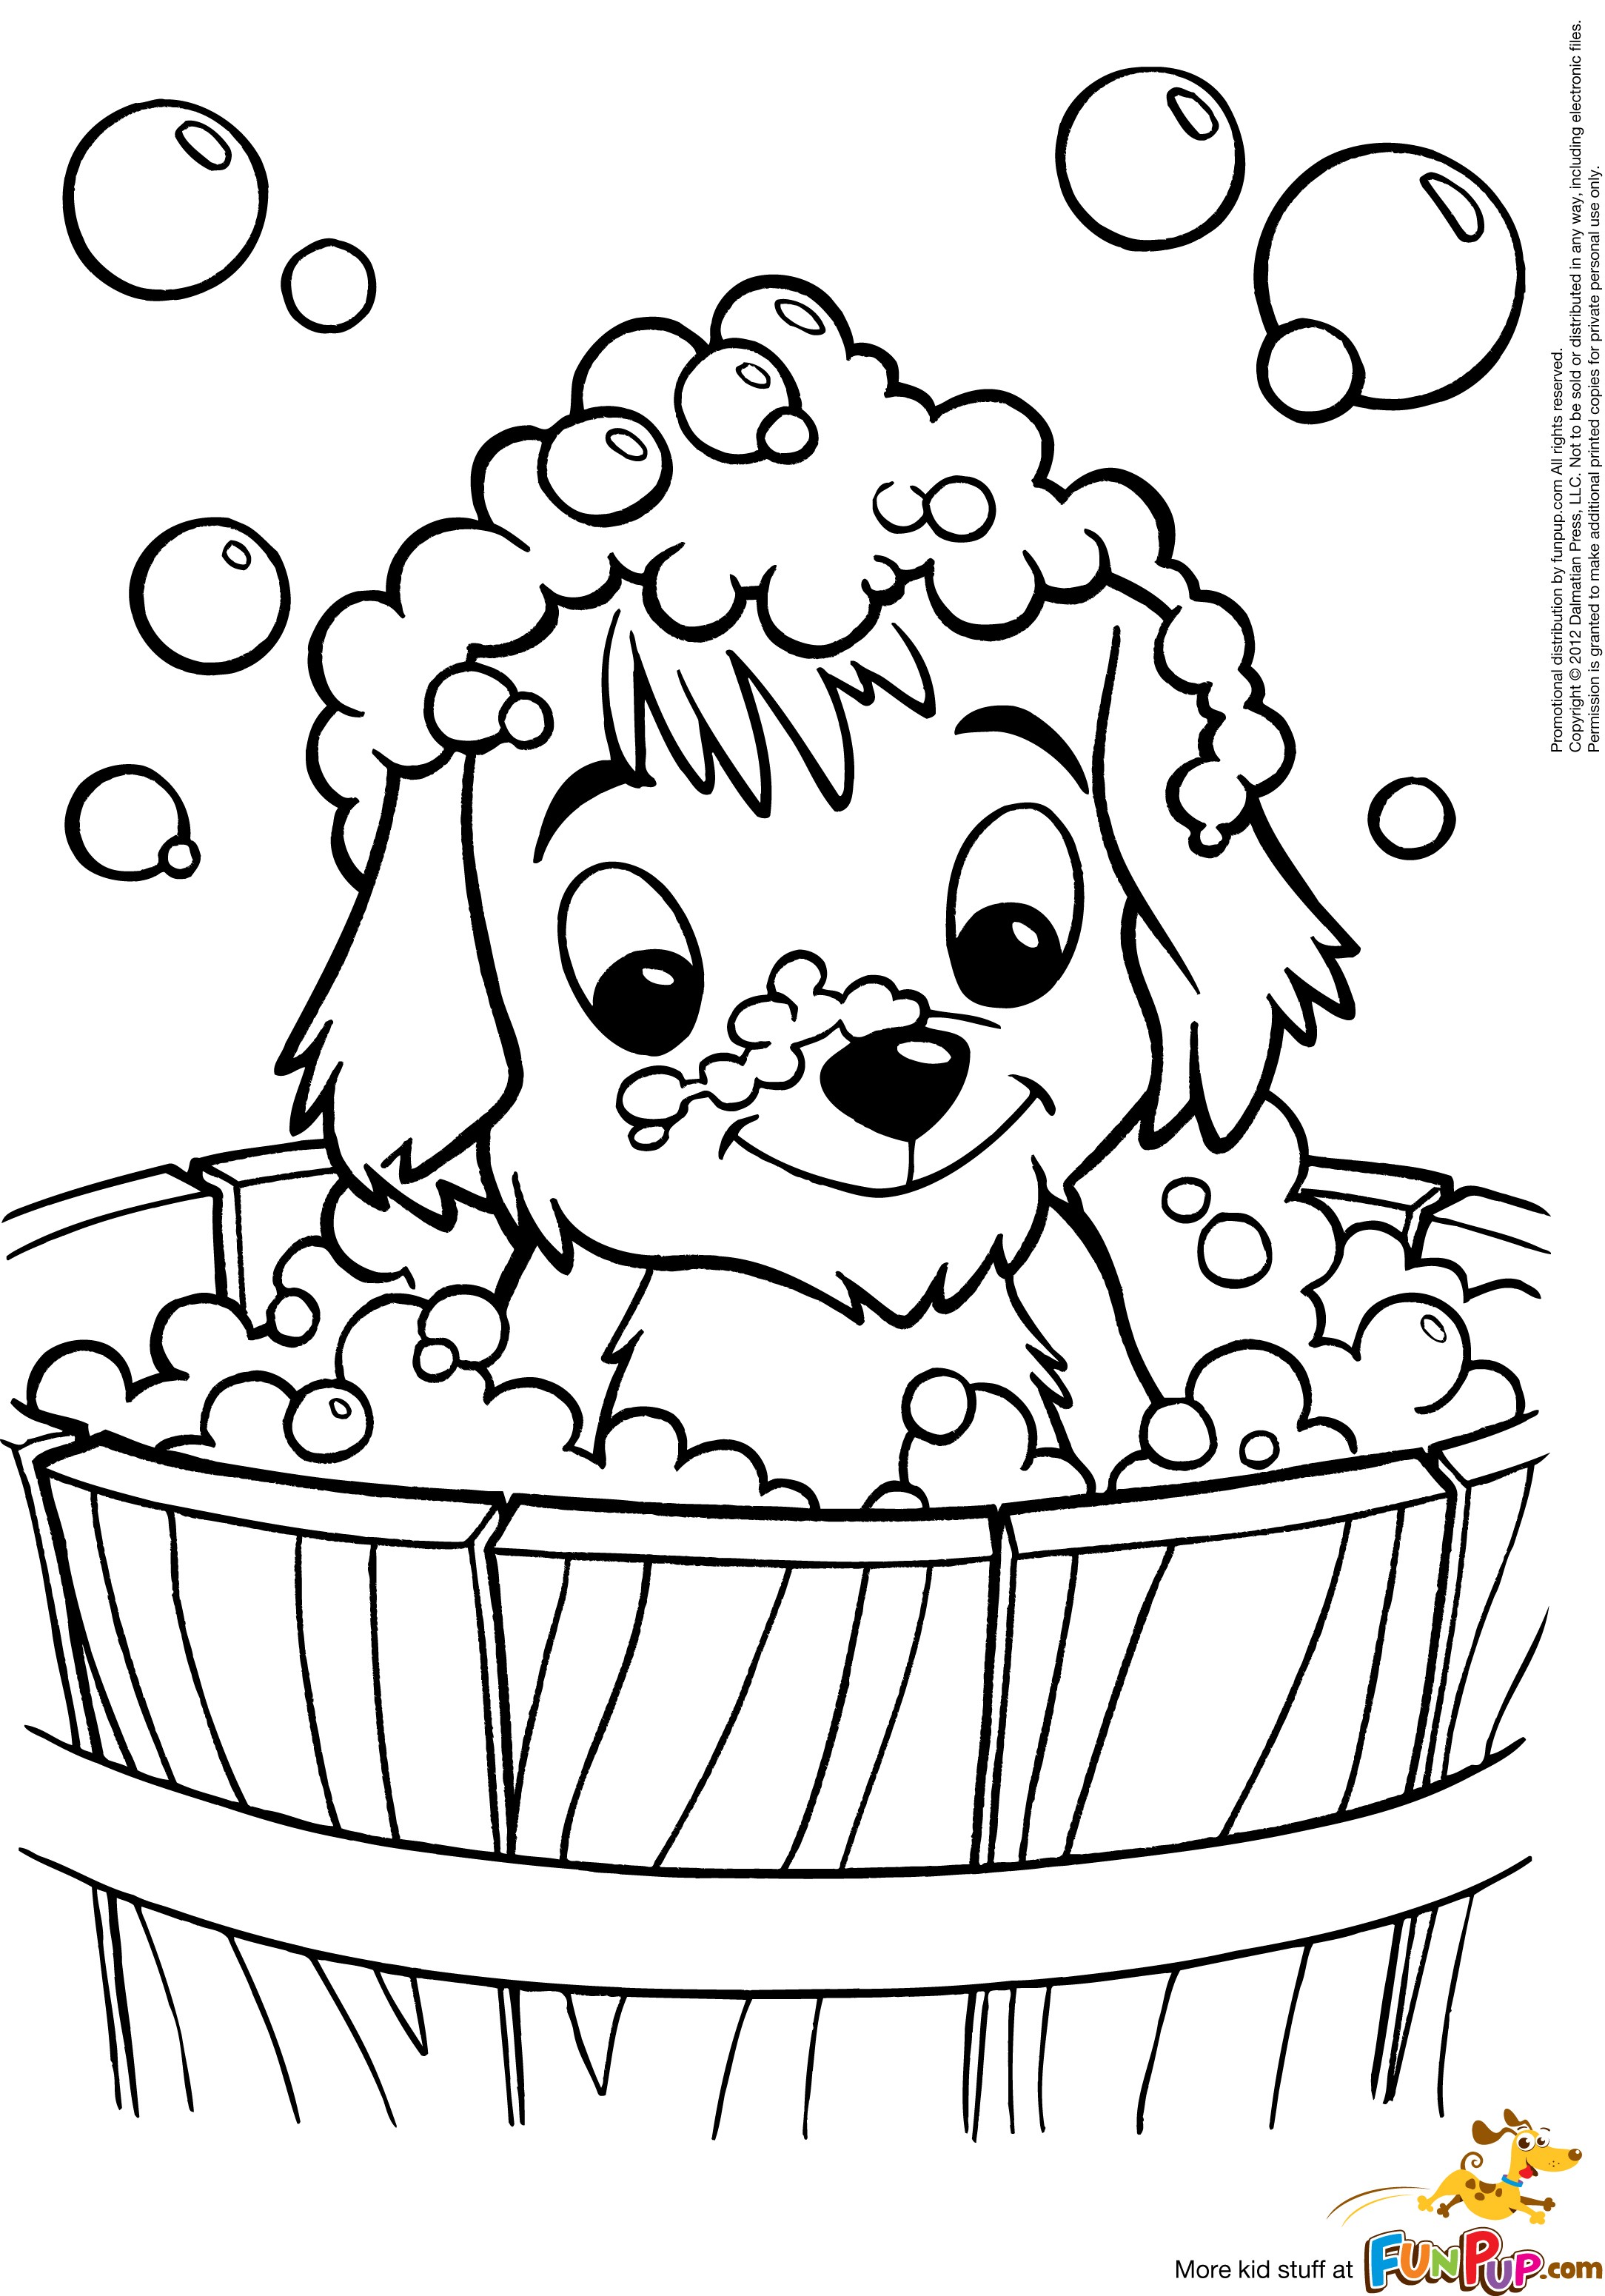 puppy-coloring-pages-for-adults-at-getdrawings-free-download